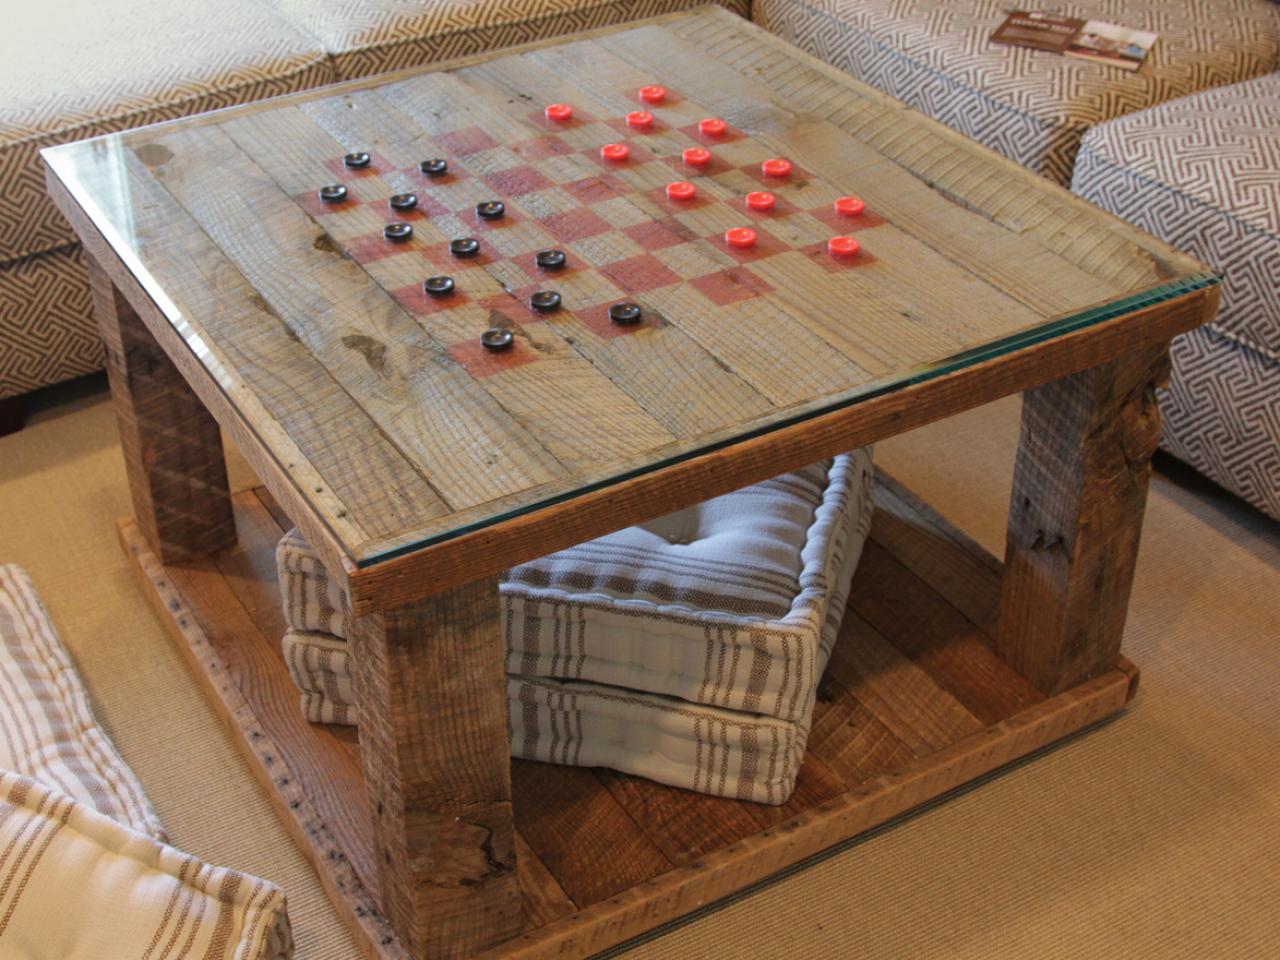 BC11_game-table-how-to-project-2694_s4x3.jpg.rend.hgtvcom.1280.960.jpeg